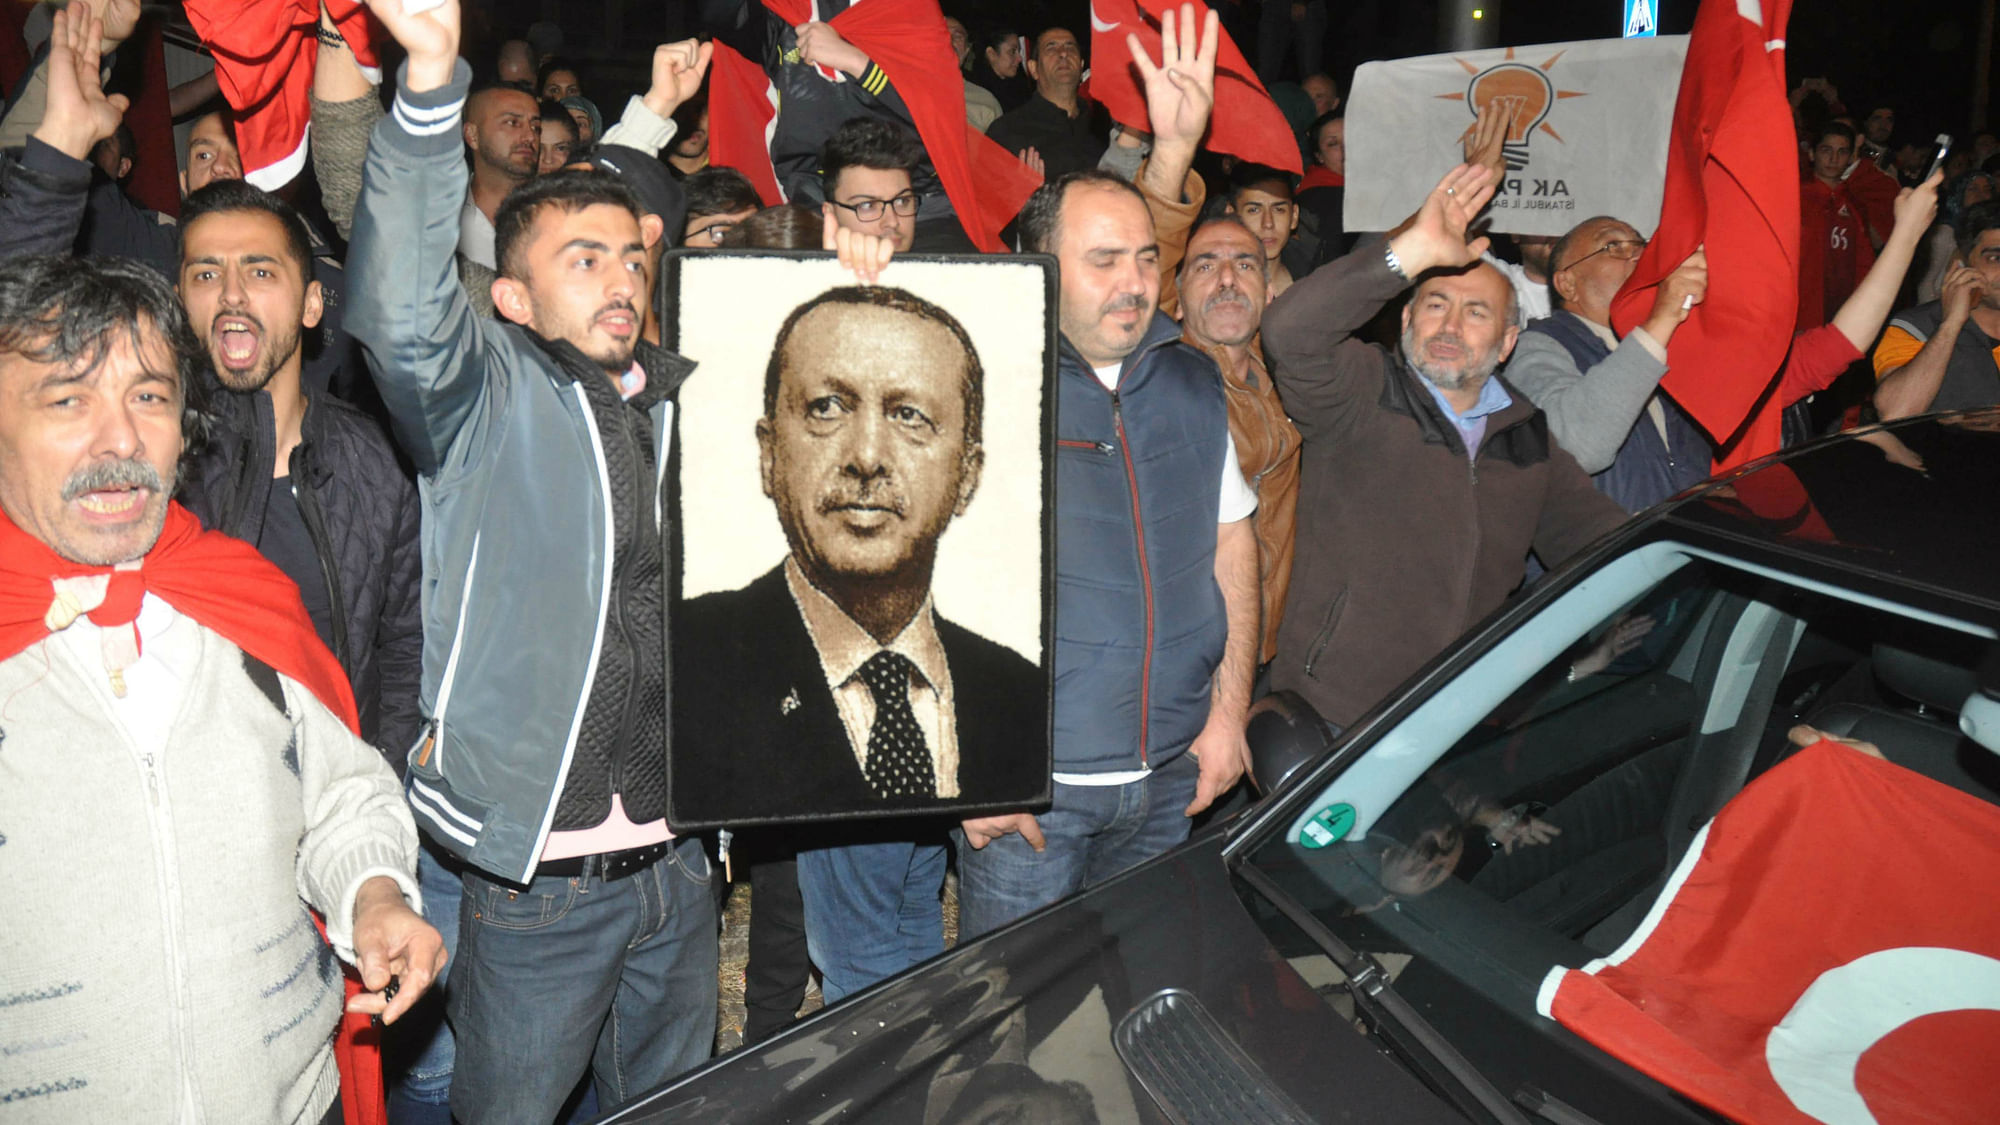 Supporters of Turkish President Recep Tayyip Erdogan demonstrate at the Turkish consulate in Stuttgart in Germany. (Photo:  AP)